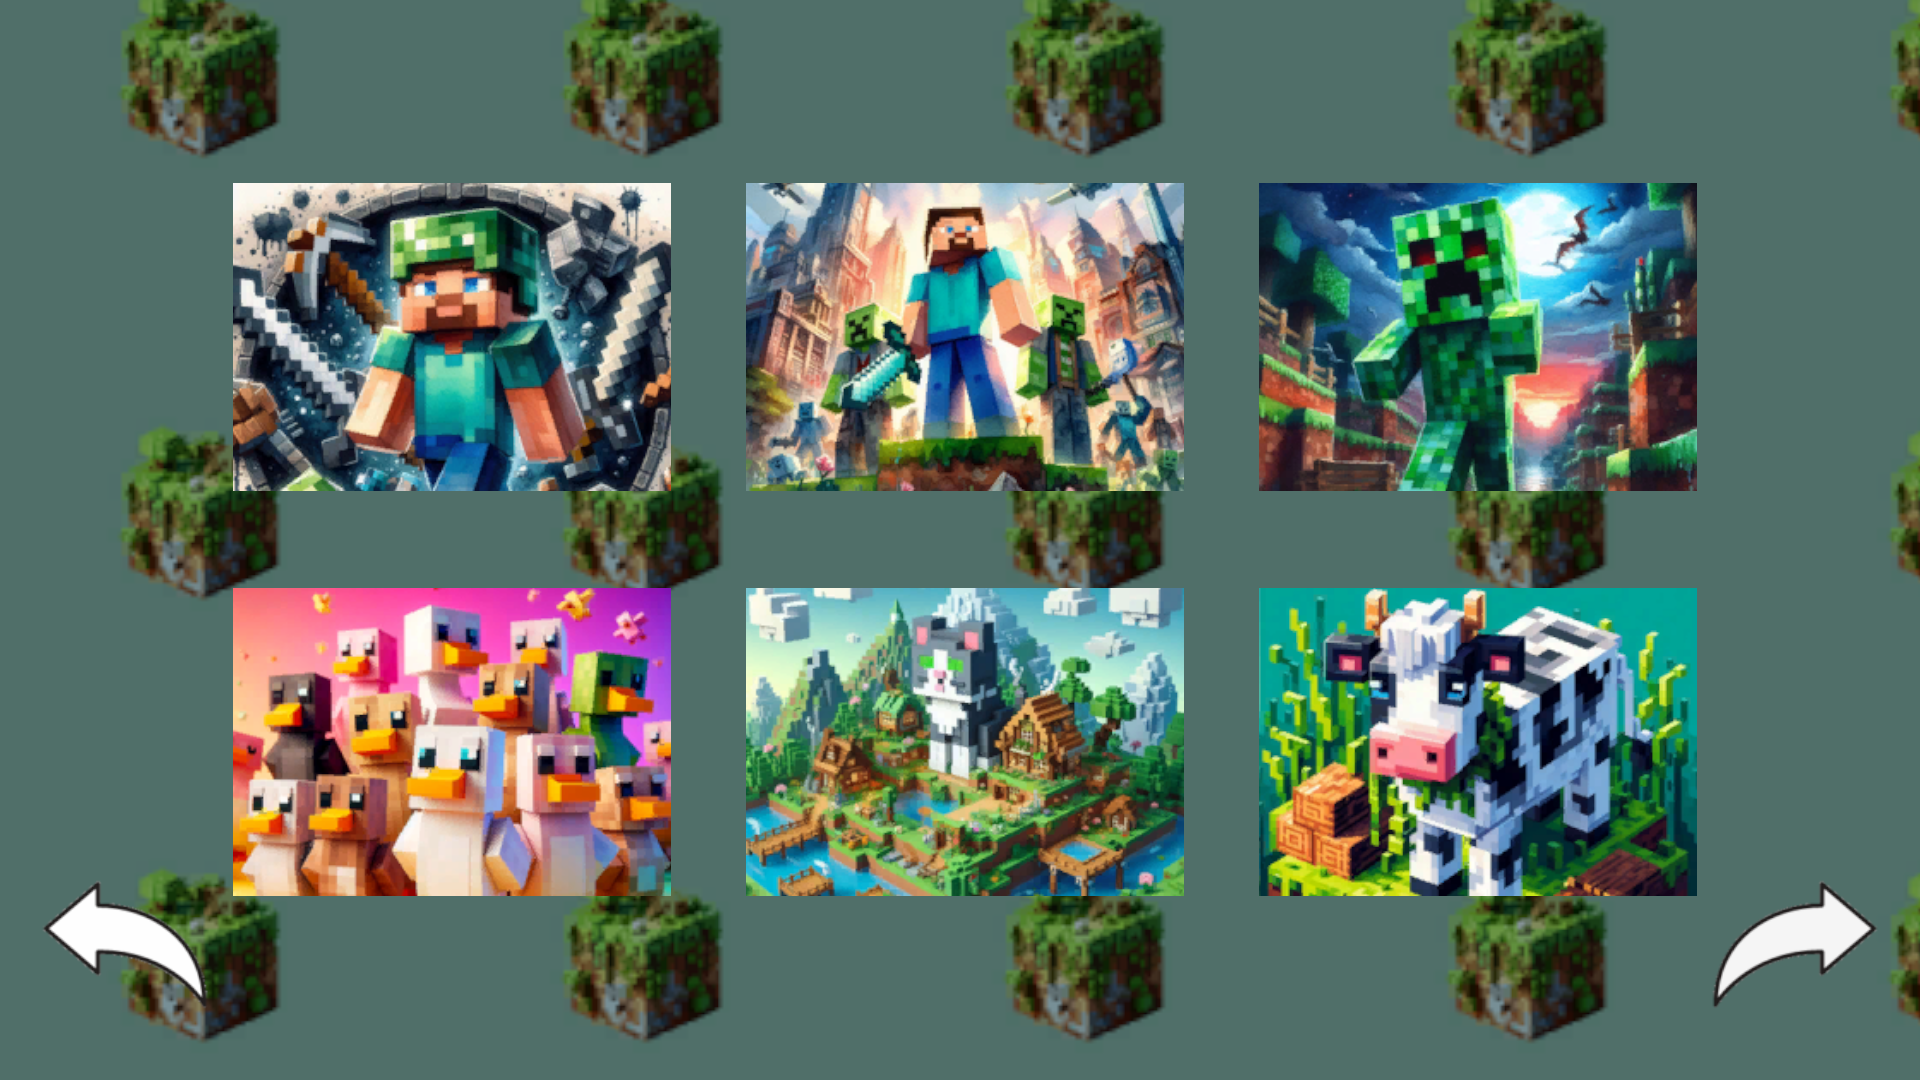 Minecraft Landscapes: Puzzle: Play Online For Free On Playhop